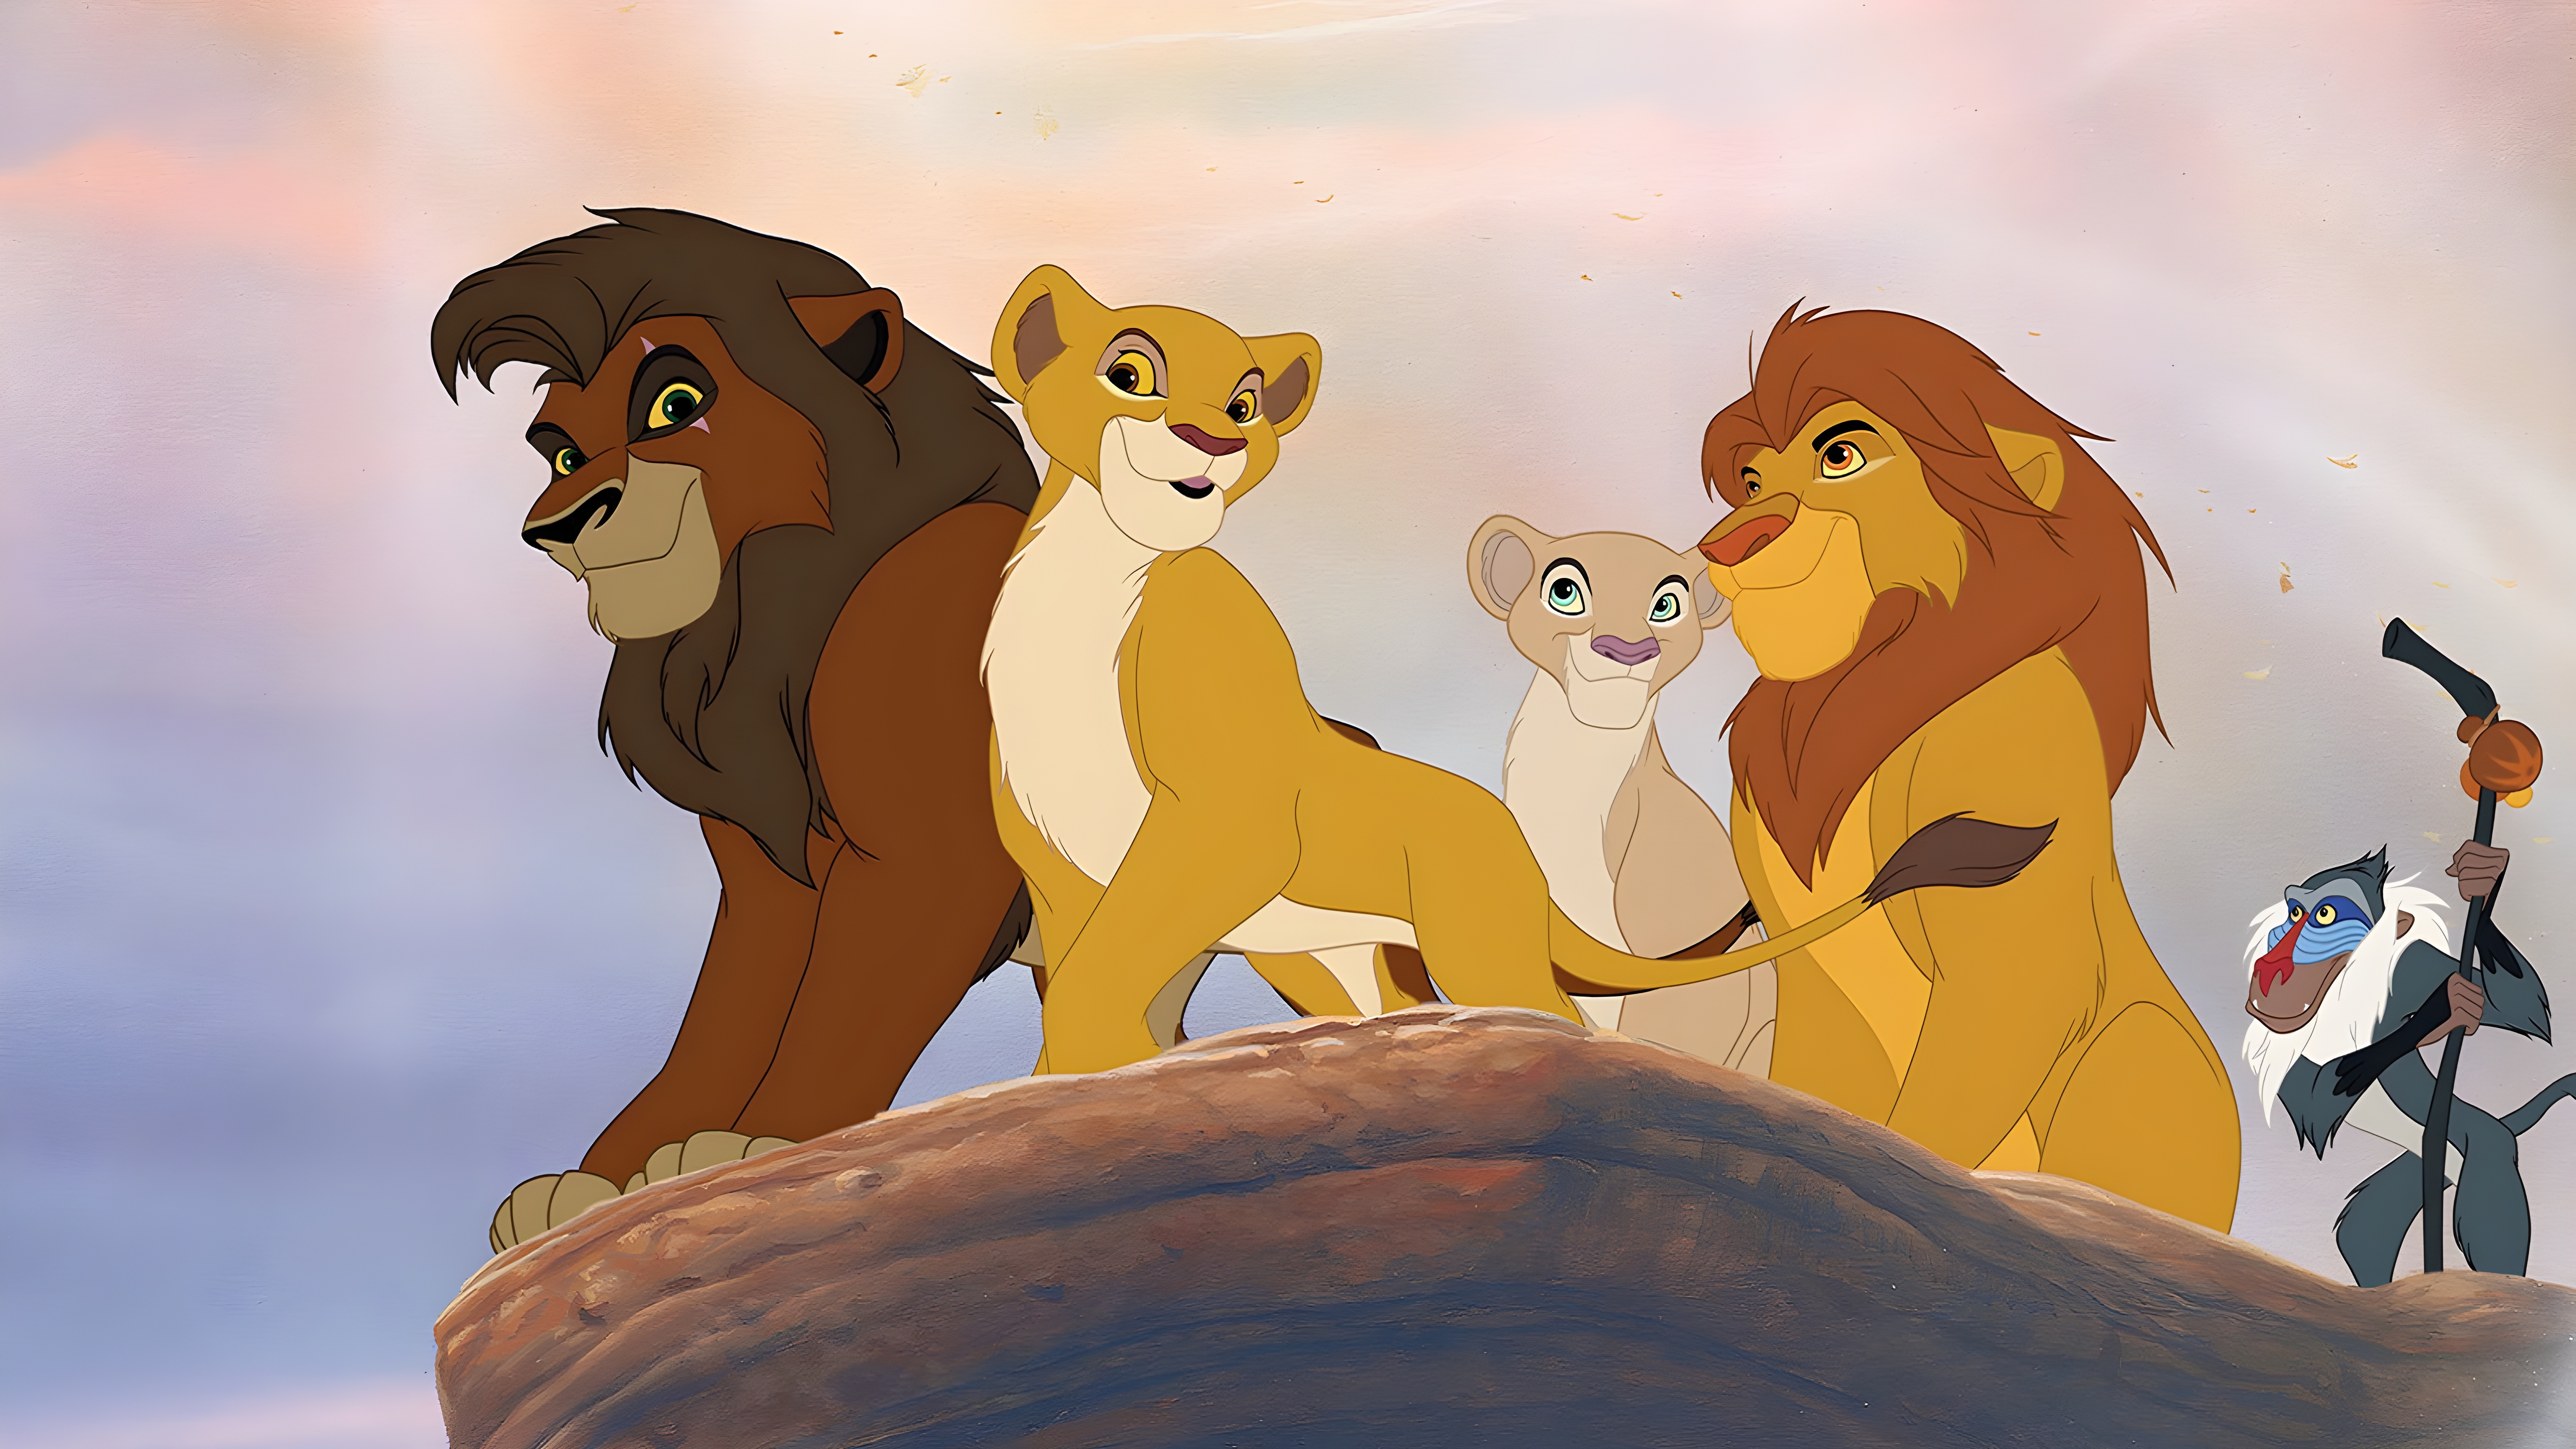 Movie The Lion King 2: Simba's Pride HD Wallpaper | Background Image